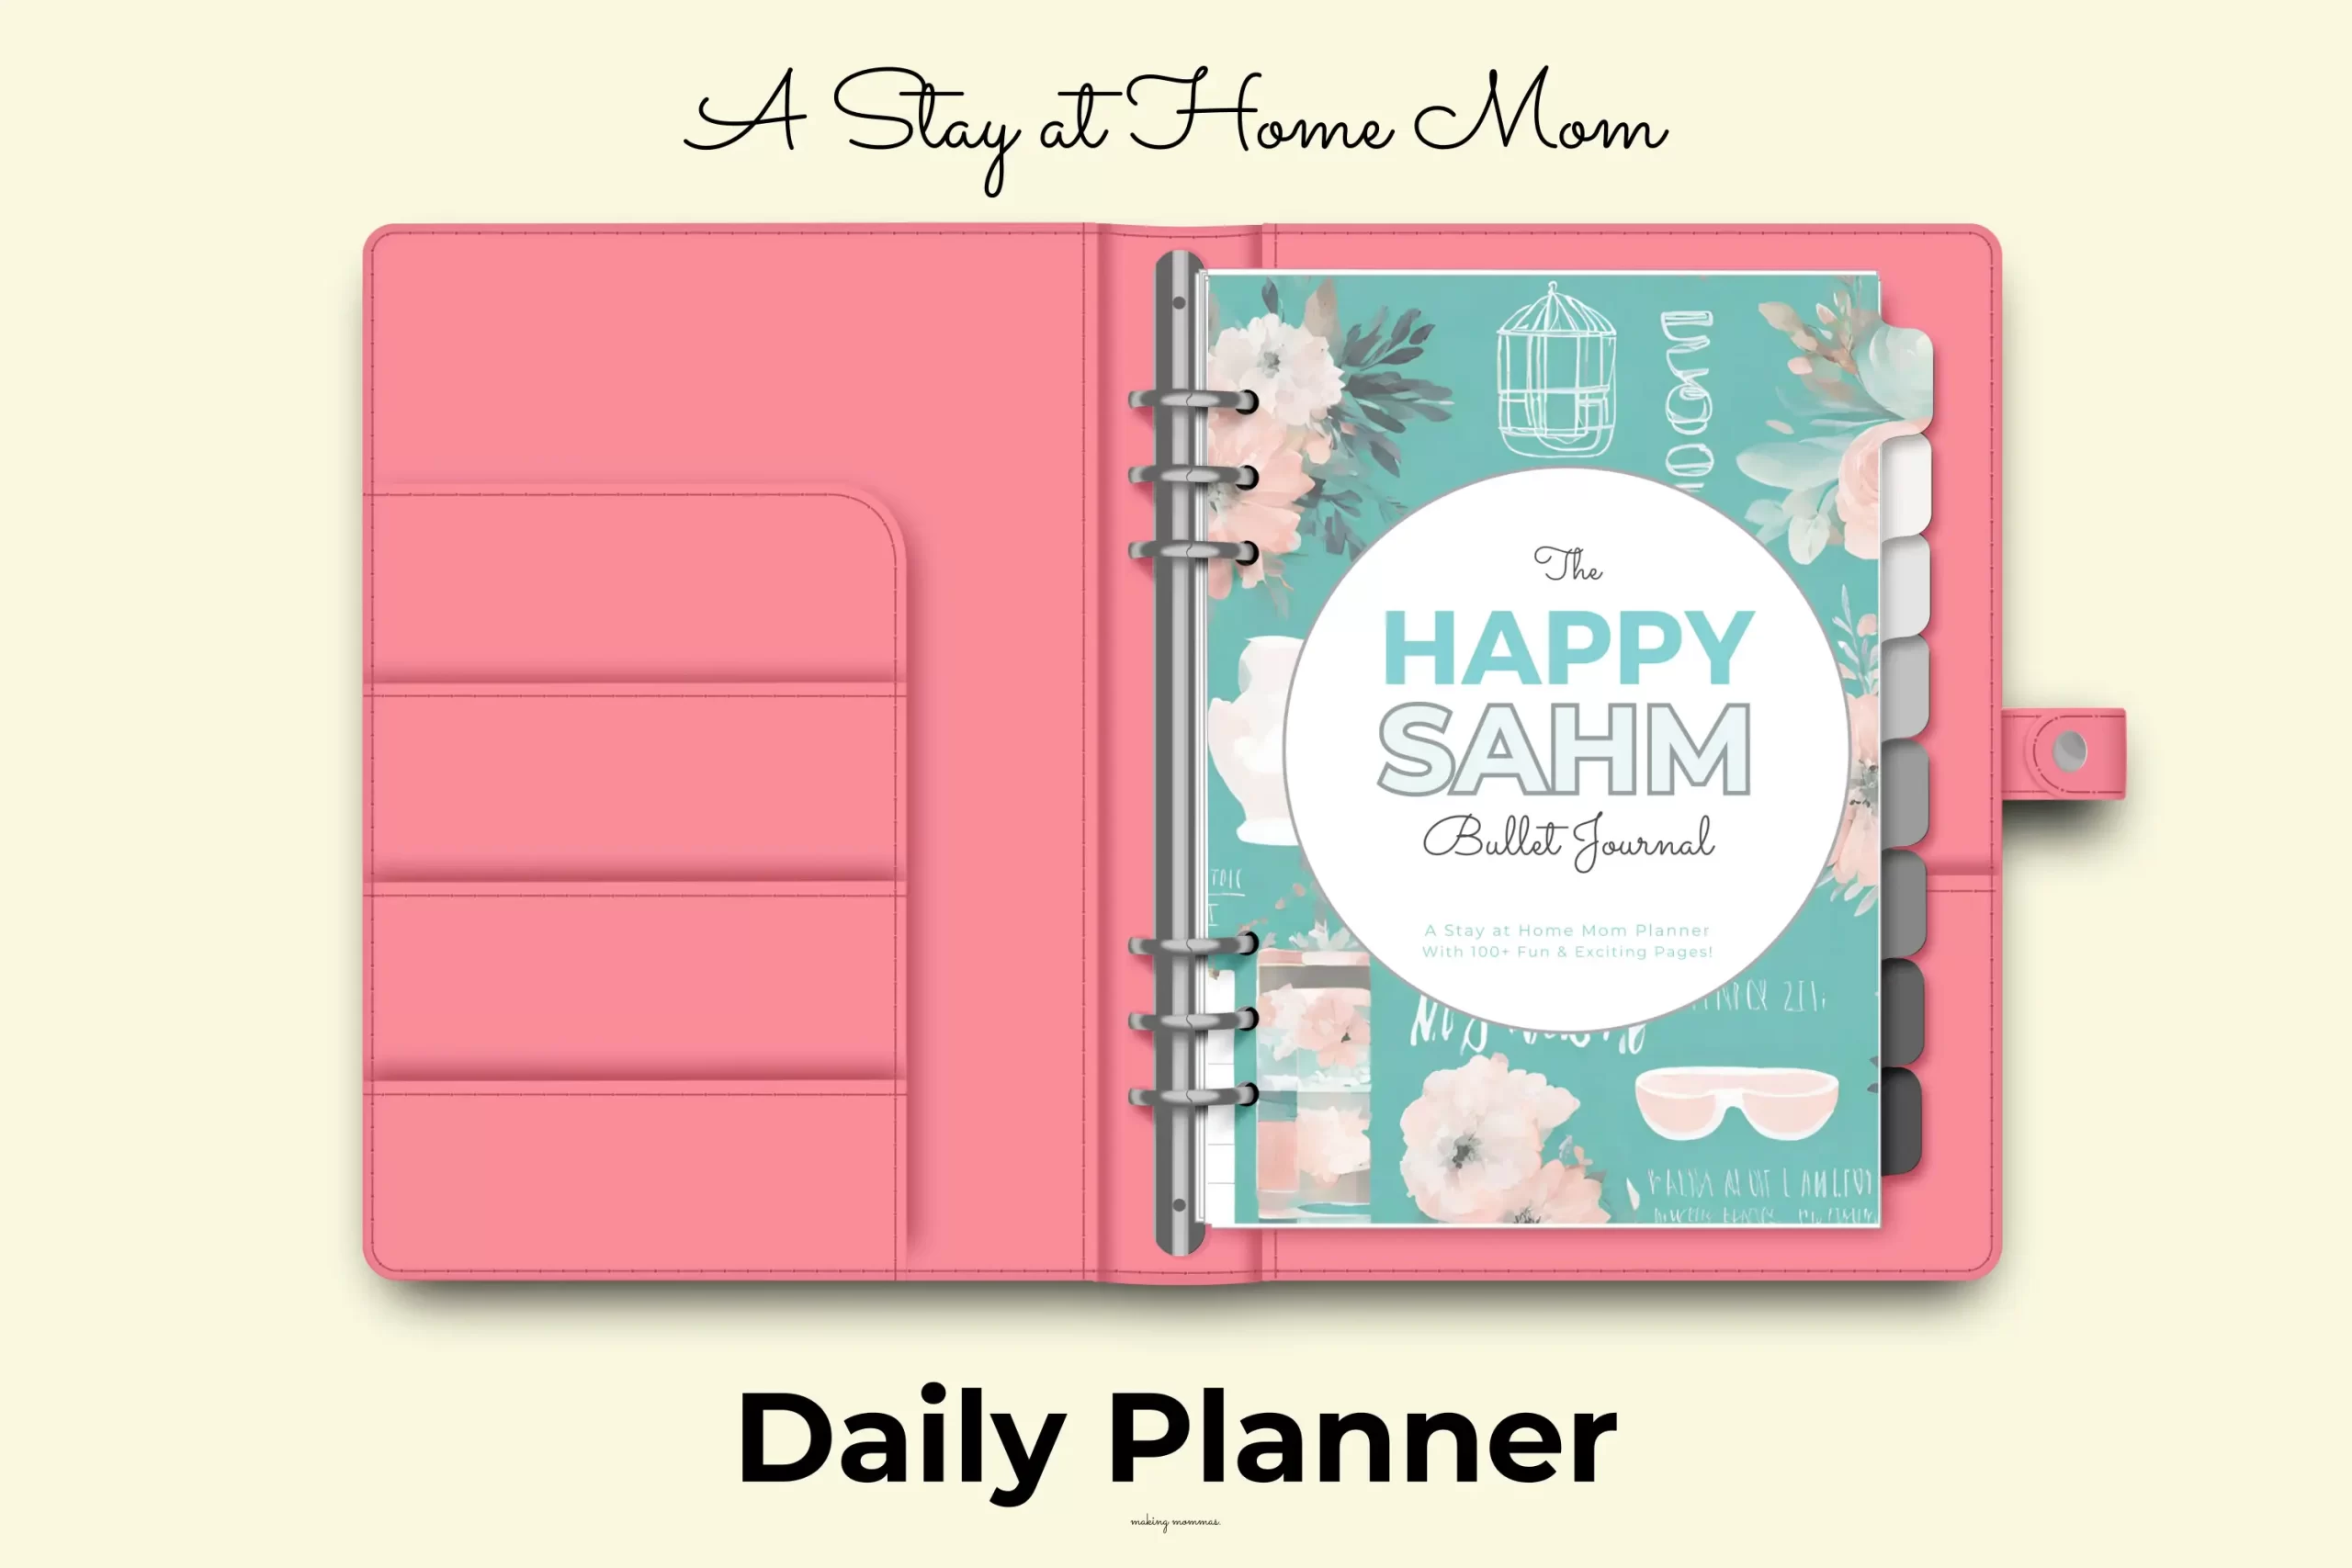 image of The Happy Sahm Bullet Journal